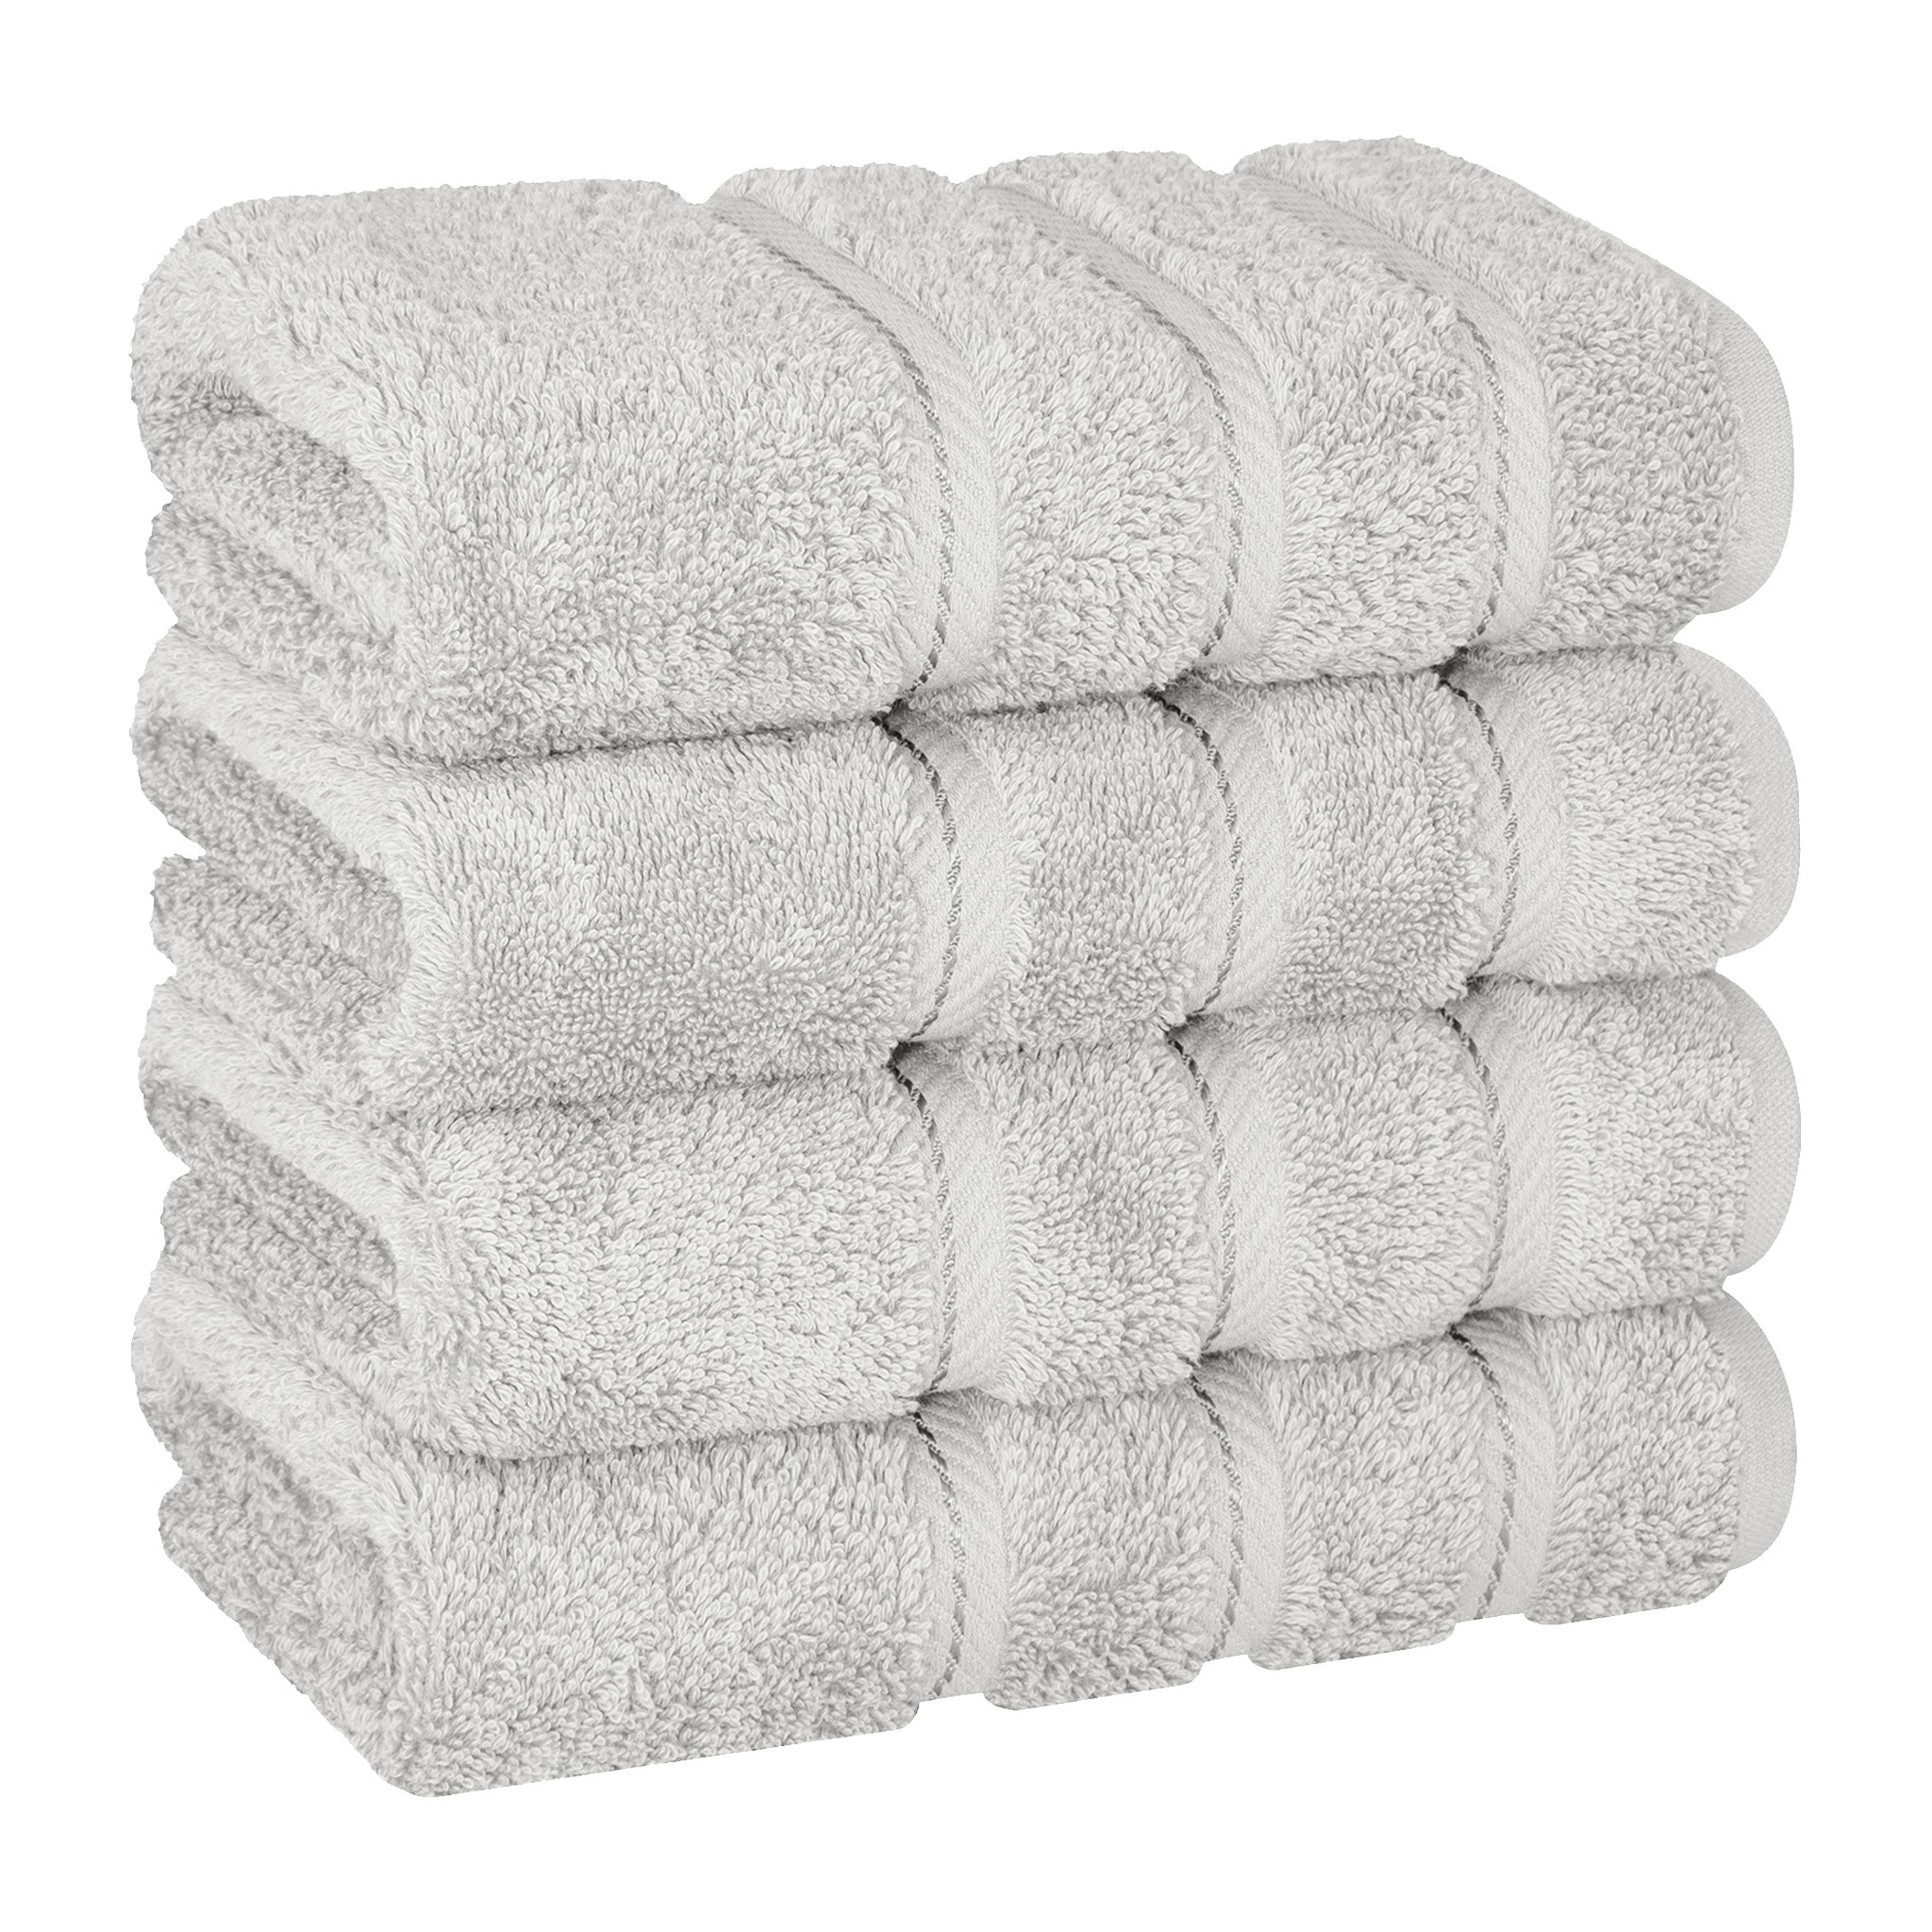 American Soft Linen 100% Turkish Cotton 4 Pack Hand Towel Set Wholesale silver-gray-1